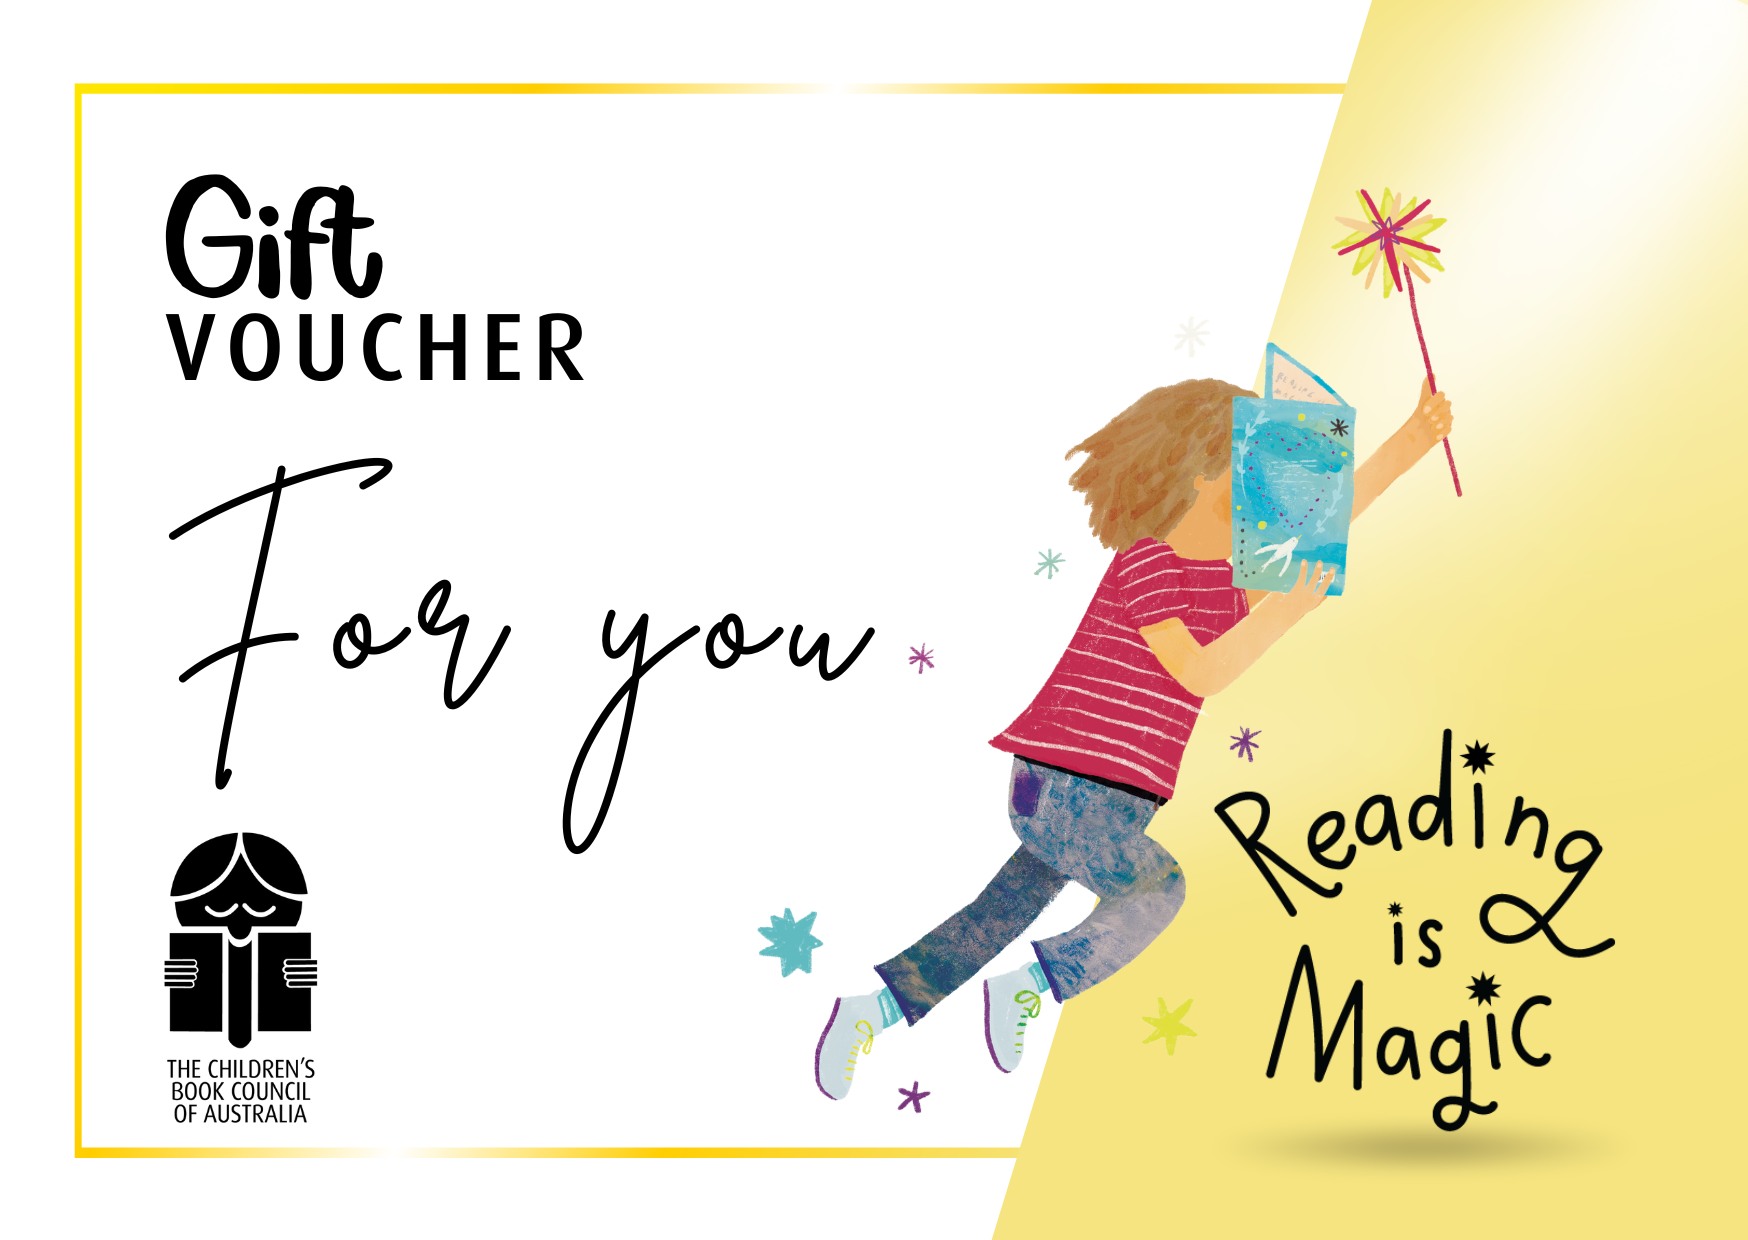 A gift voucher image, with the CBCA logo in the lower left corner and an illustration of a child in profile reading from a book being held in one hand and a wand upwards in the other arm.